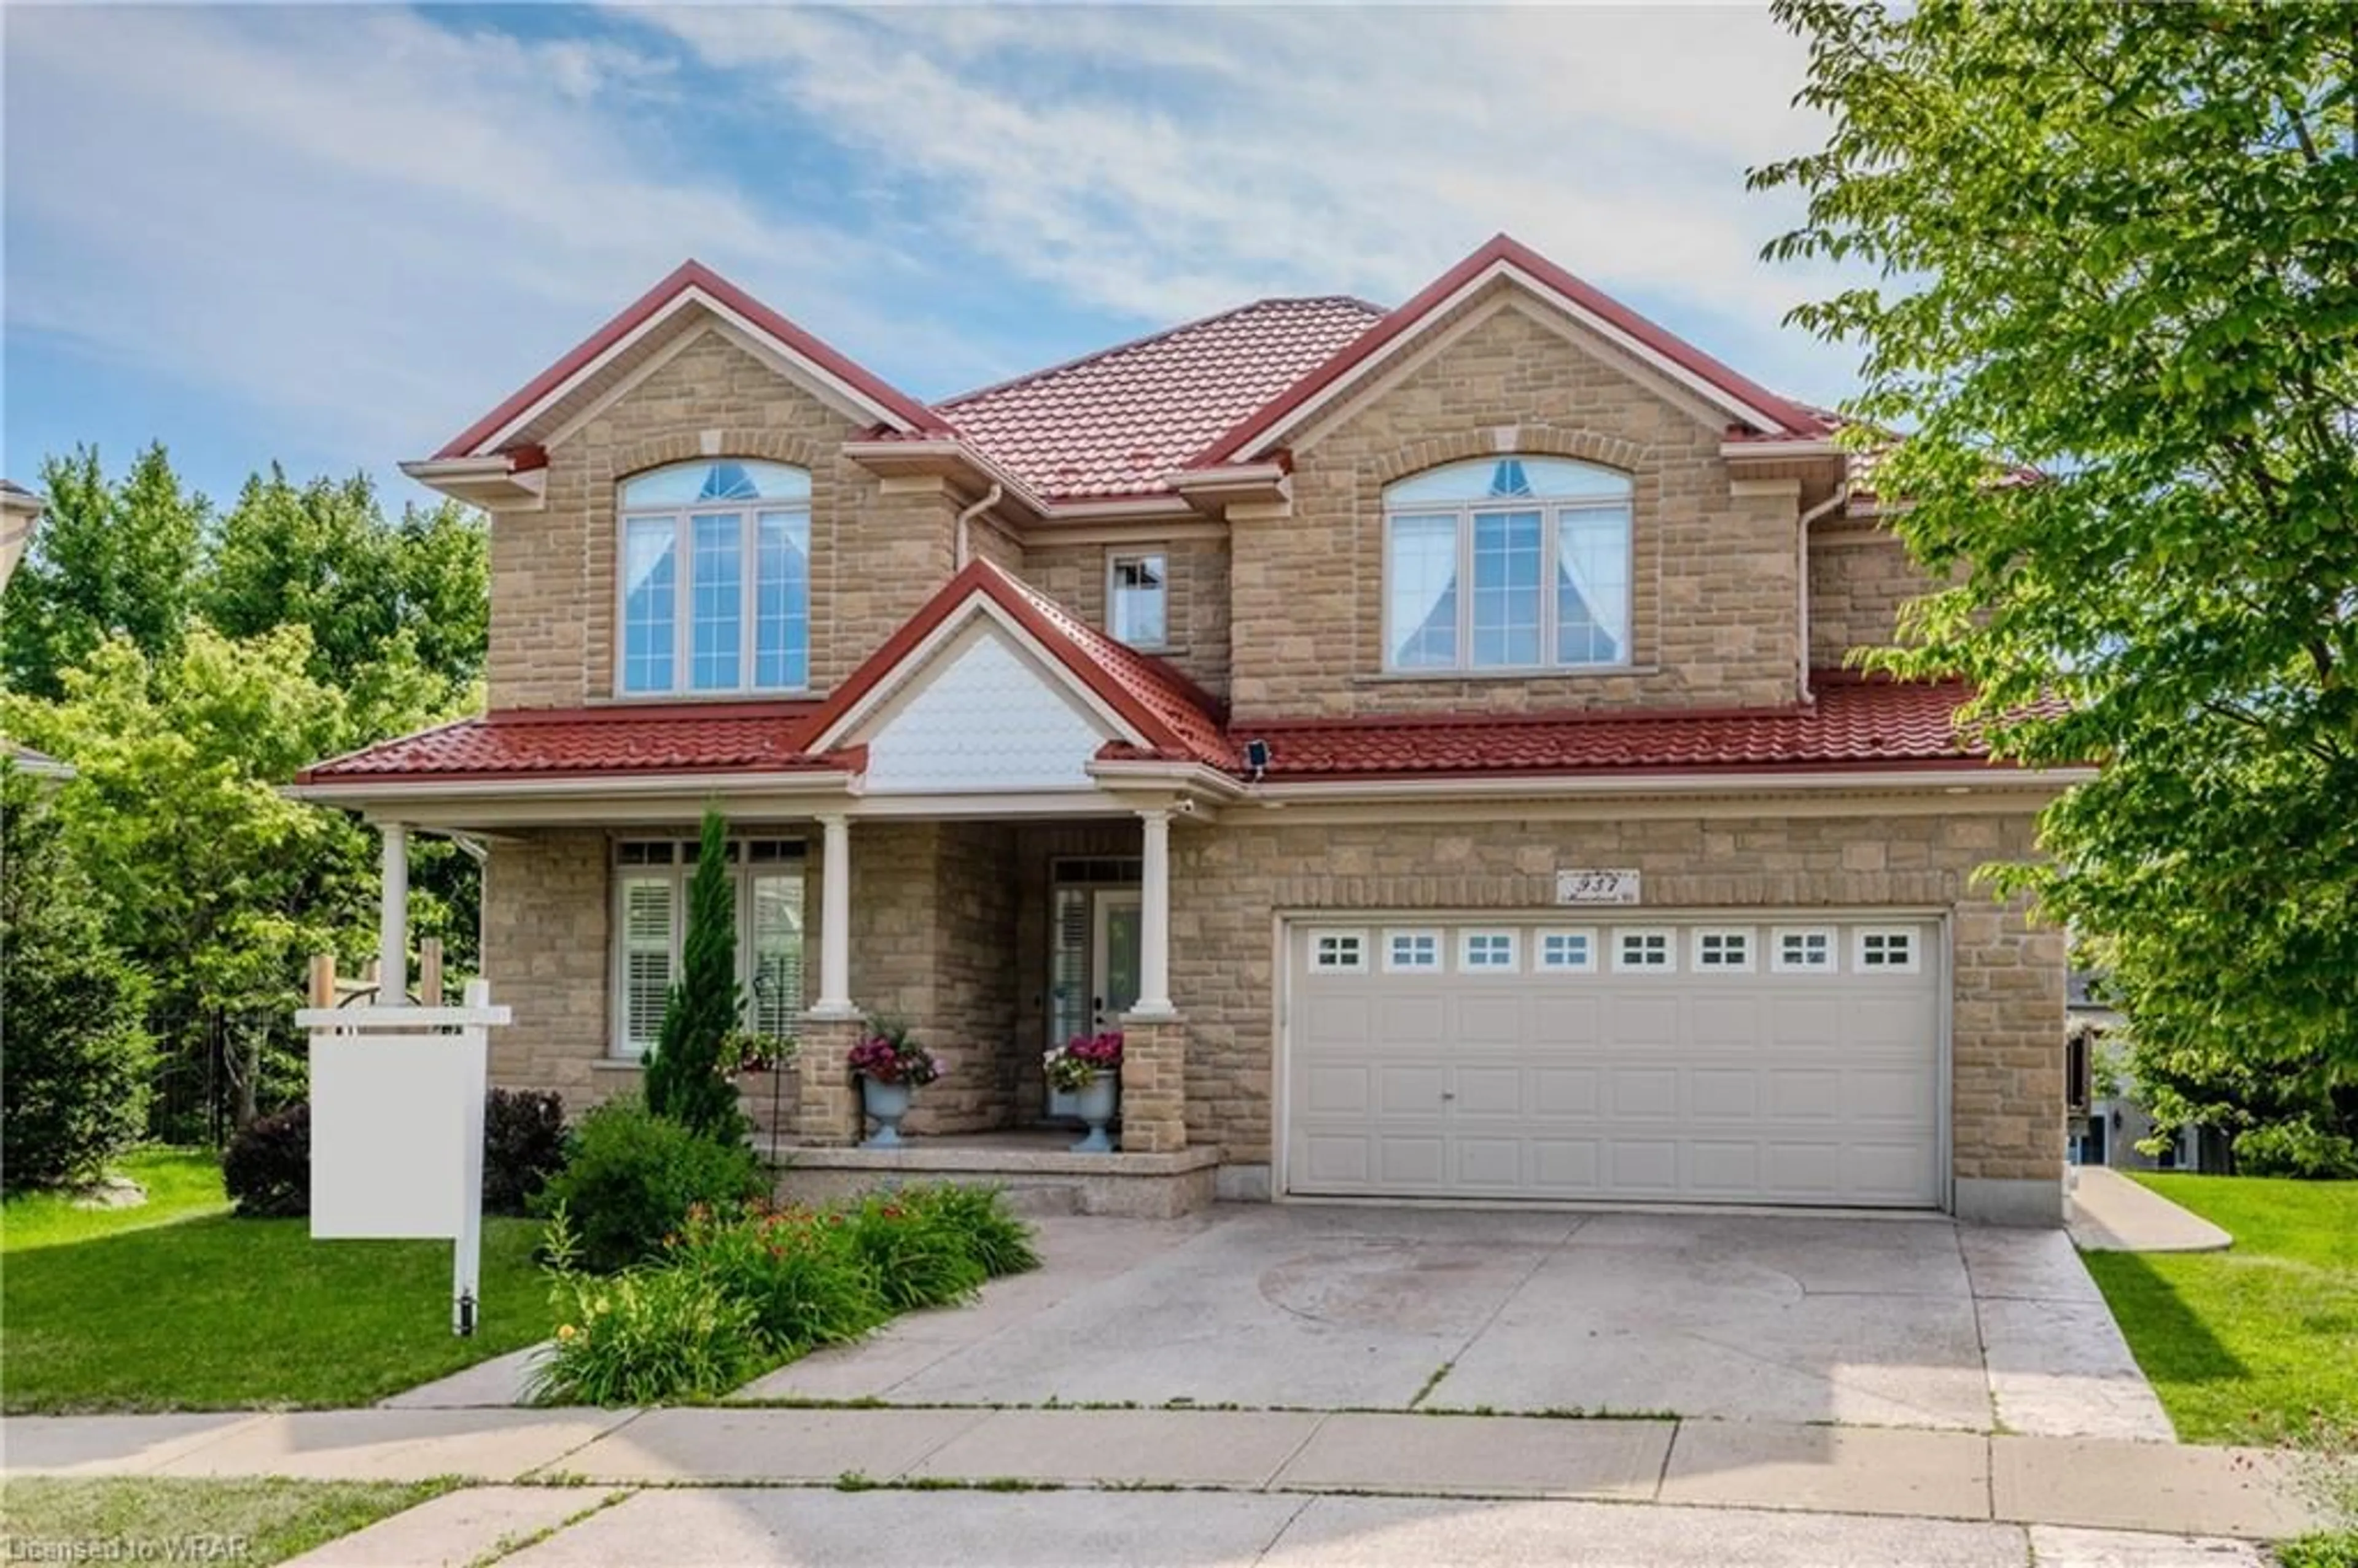 Home with brick exterior material for 937 Manorbrook Crt, Kitchener Ontario N2P 2Y2